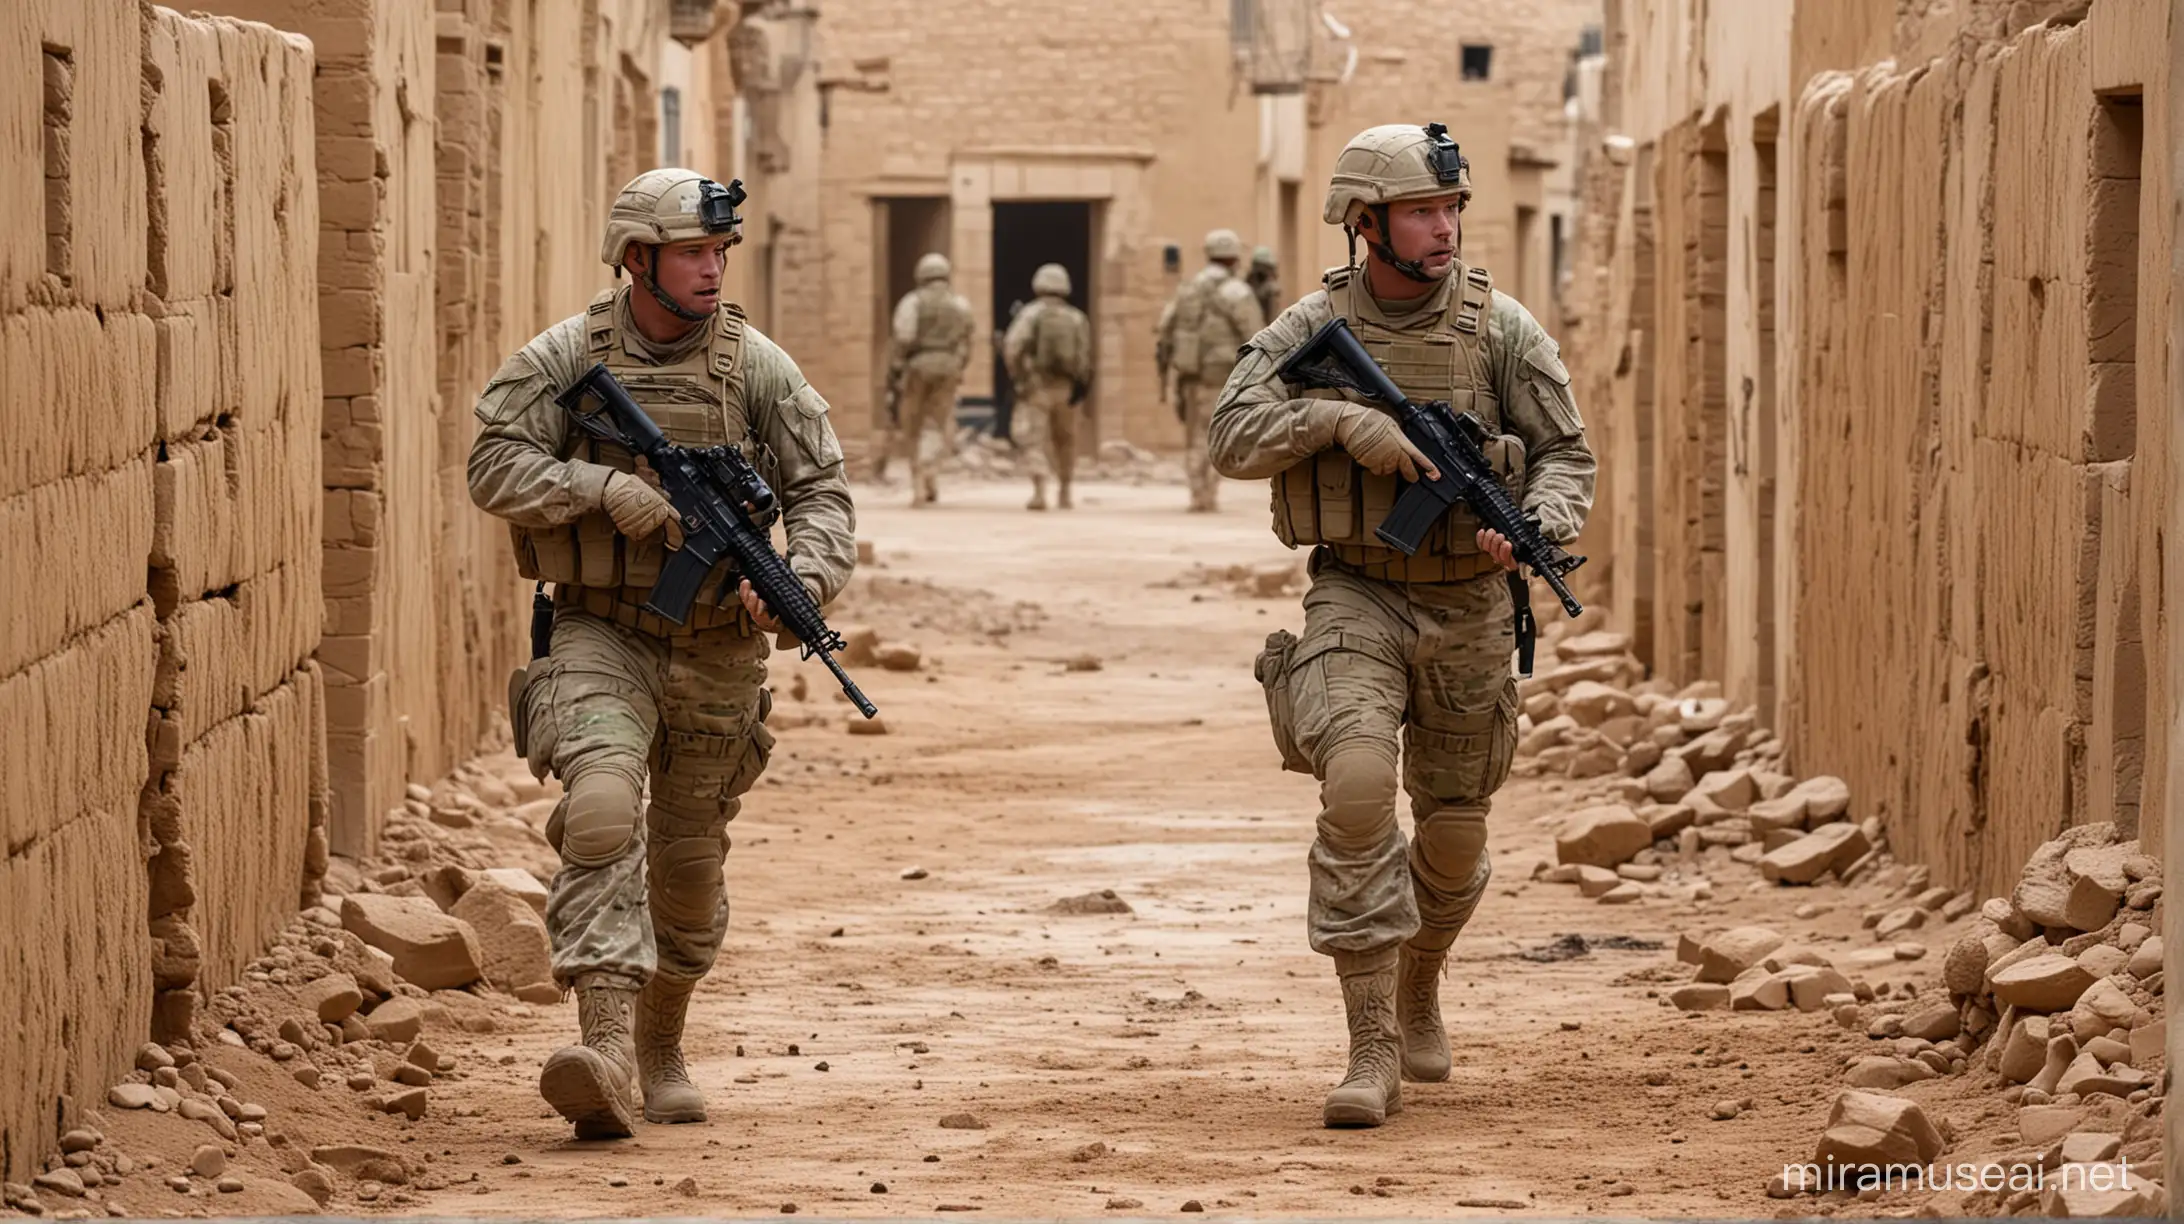 21st century white Irish-American soldier wearing multicam carrying a carbine talking to a four other soldiers surrounded by mud brick walls in the middle east